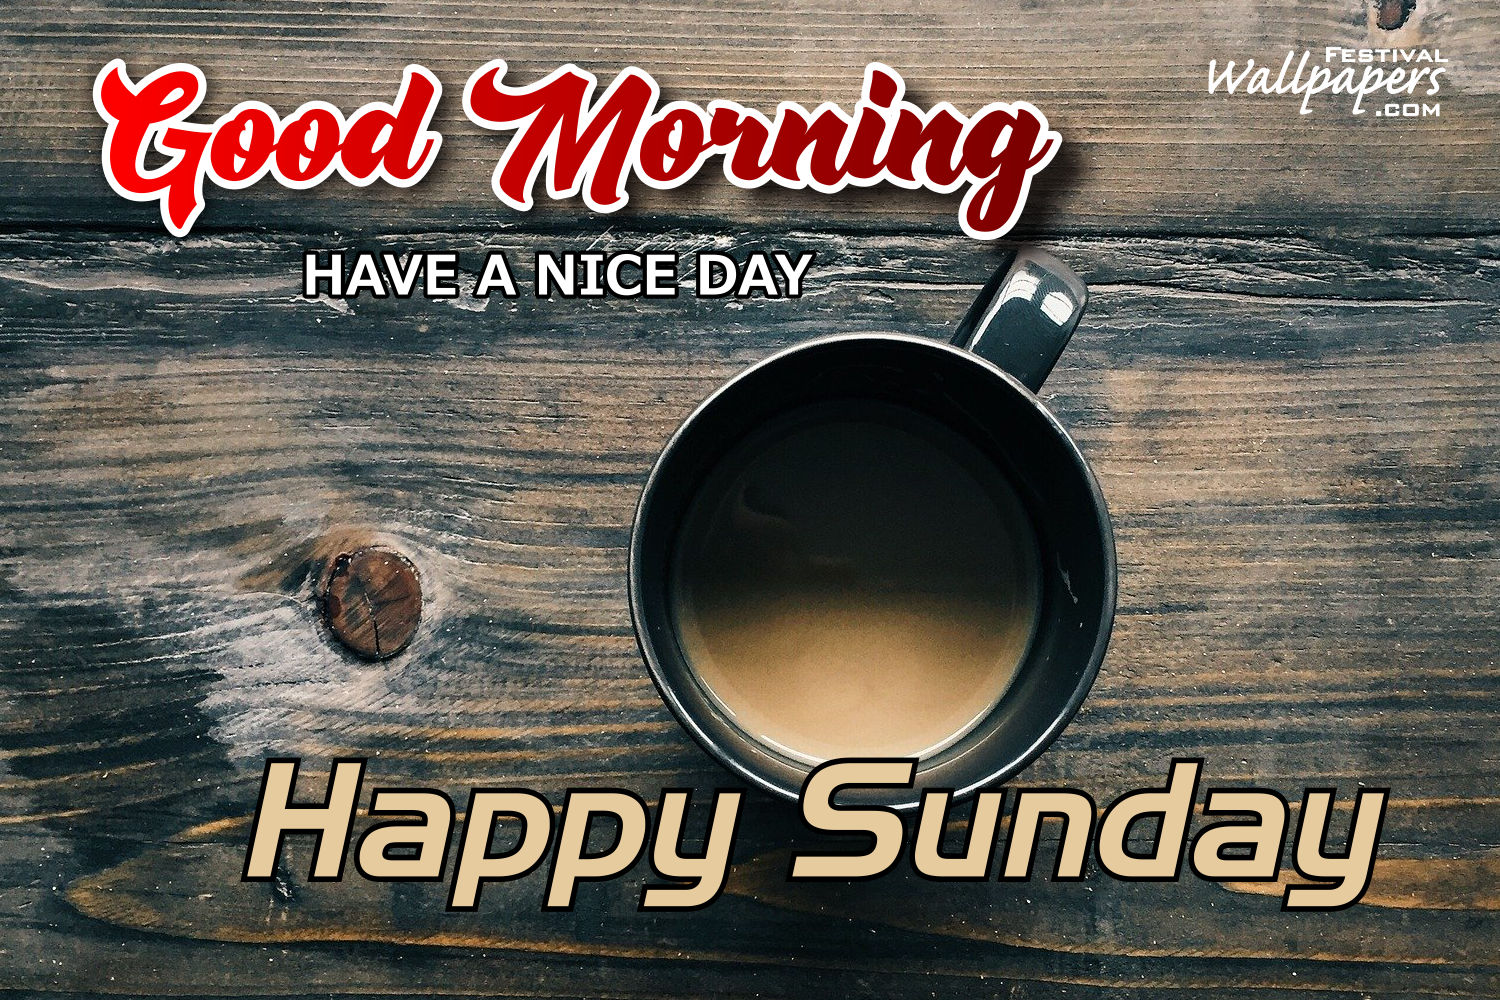 Good Morning Happy Sunday Hd Images - Poster - HD Wallpaper 